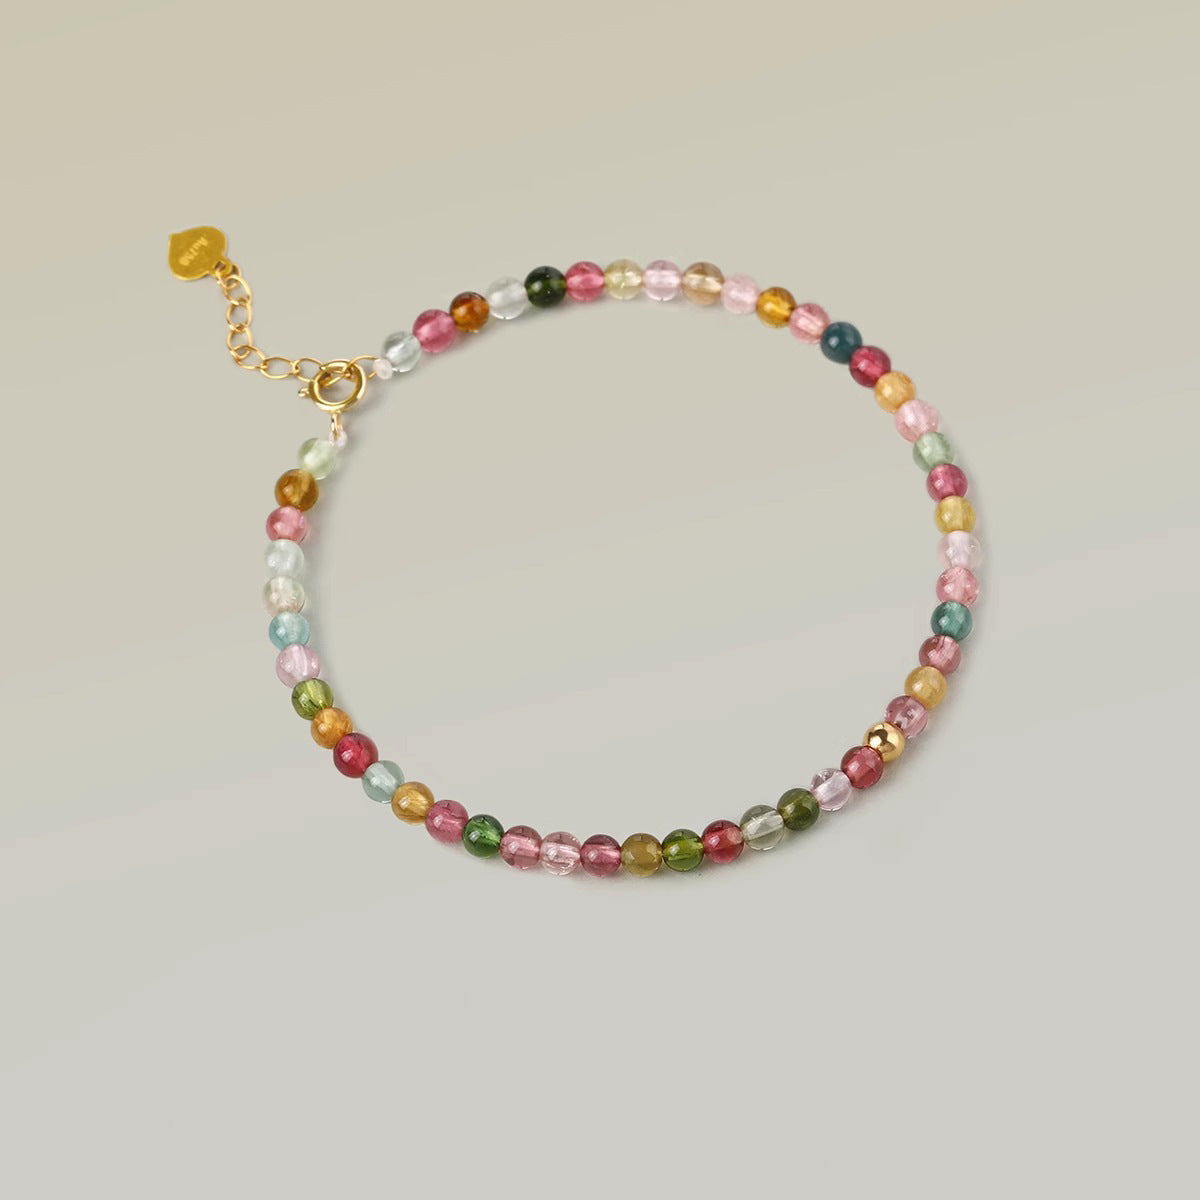 Colorful Tourmaline Bracelet from Fortune's Favor Collection